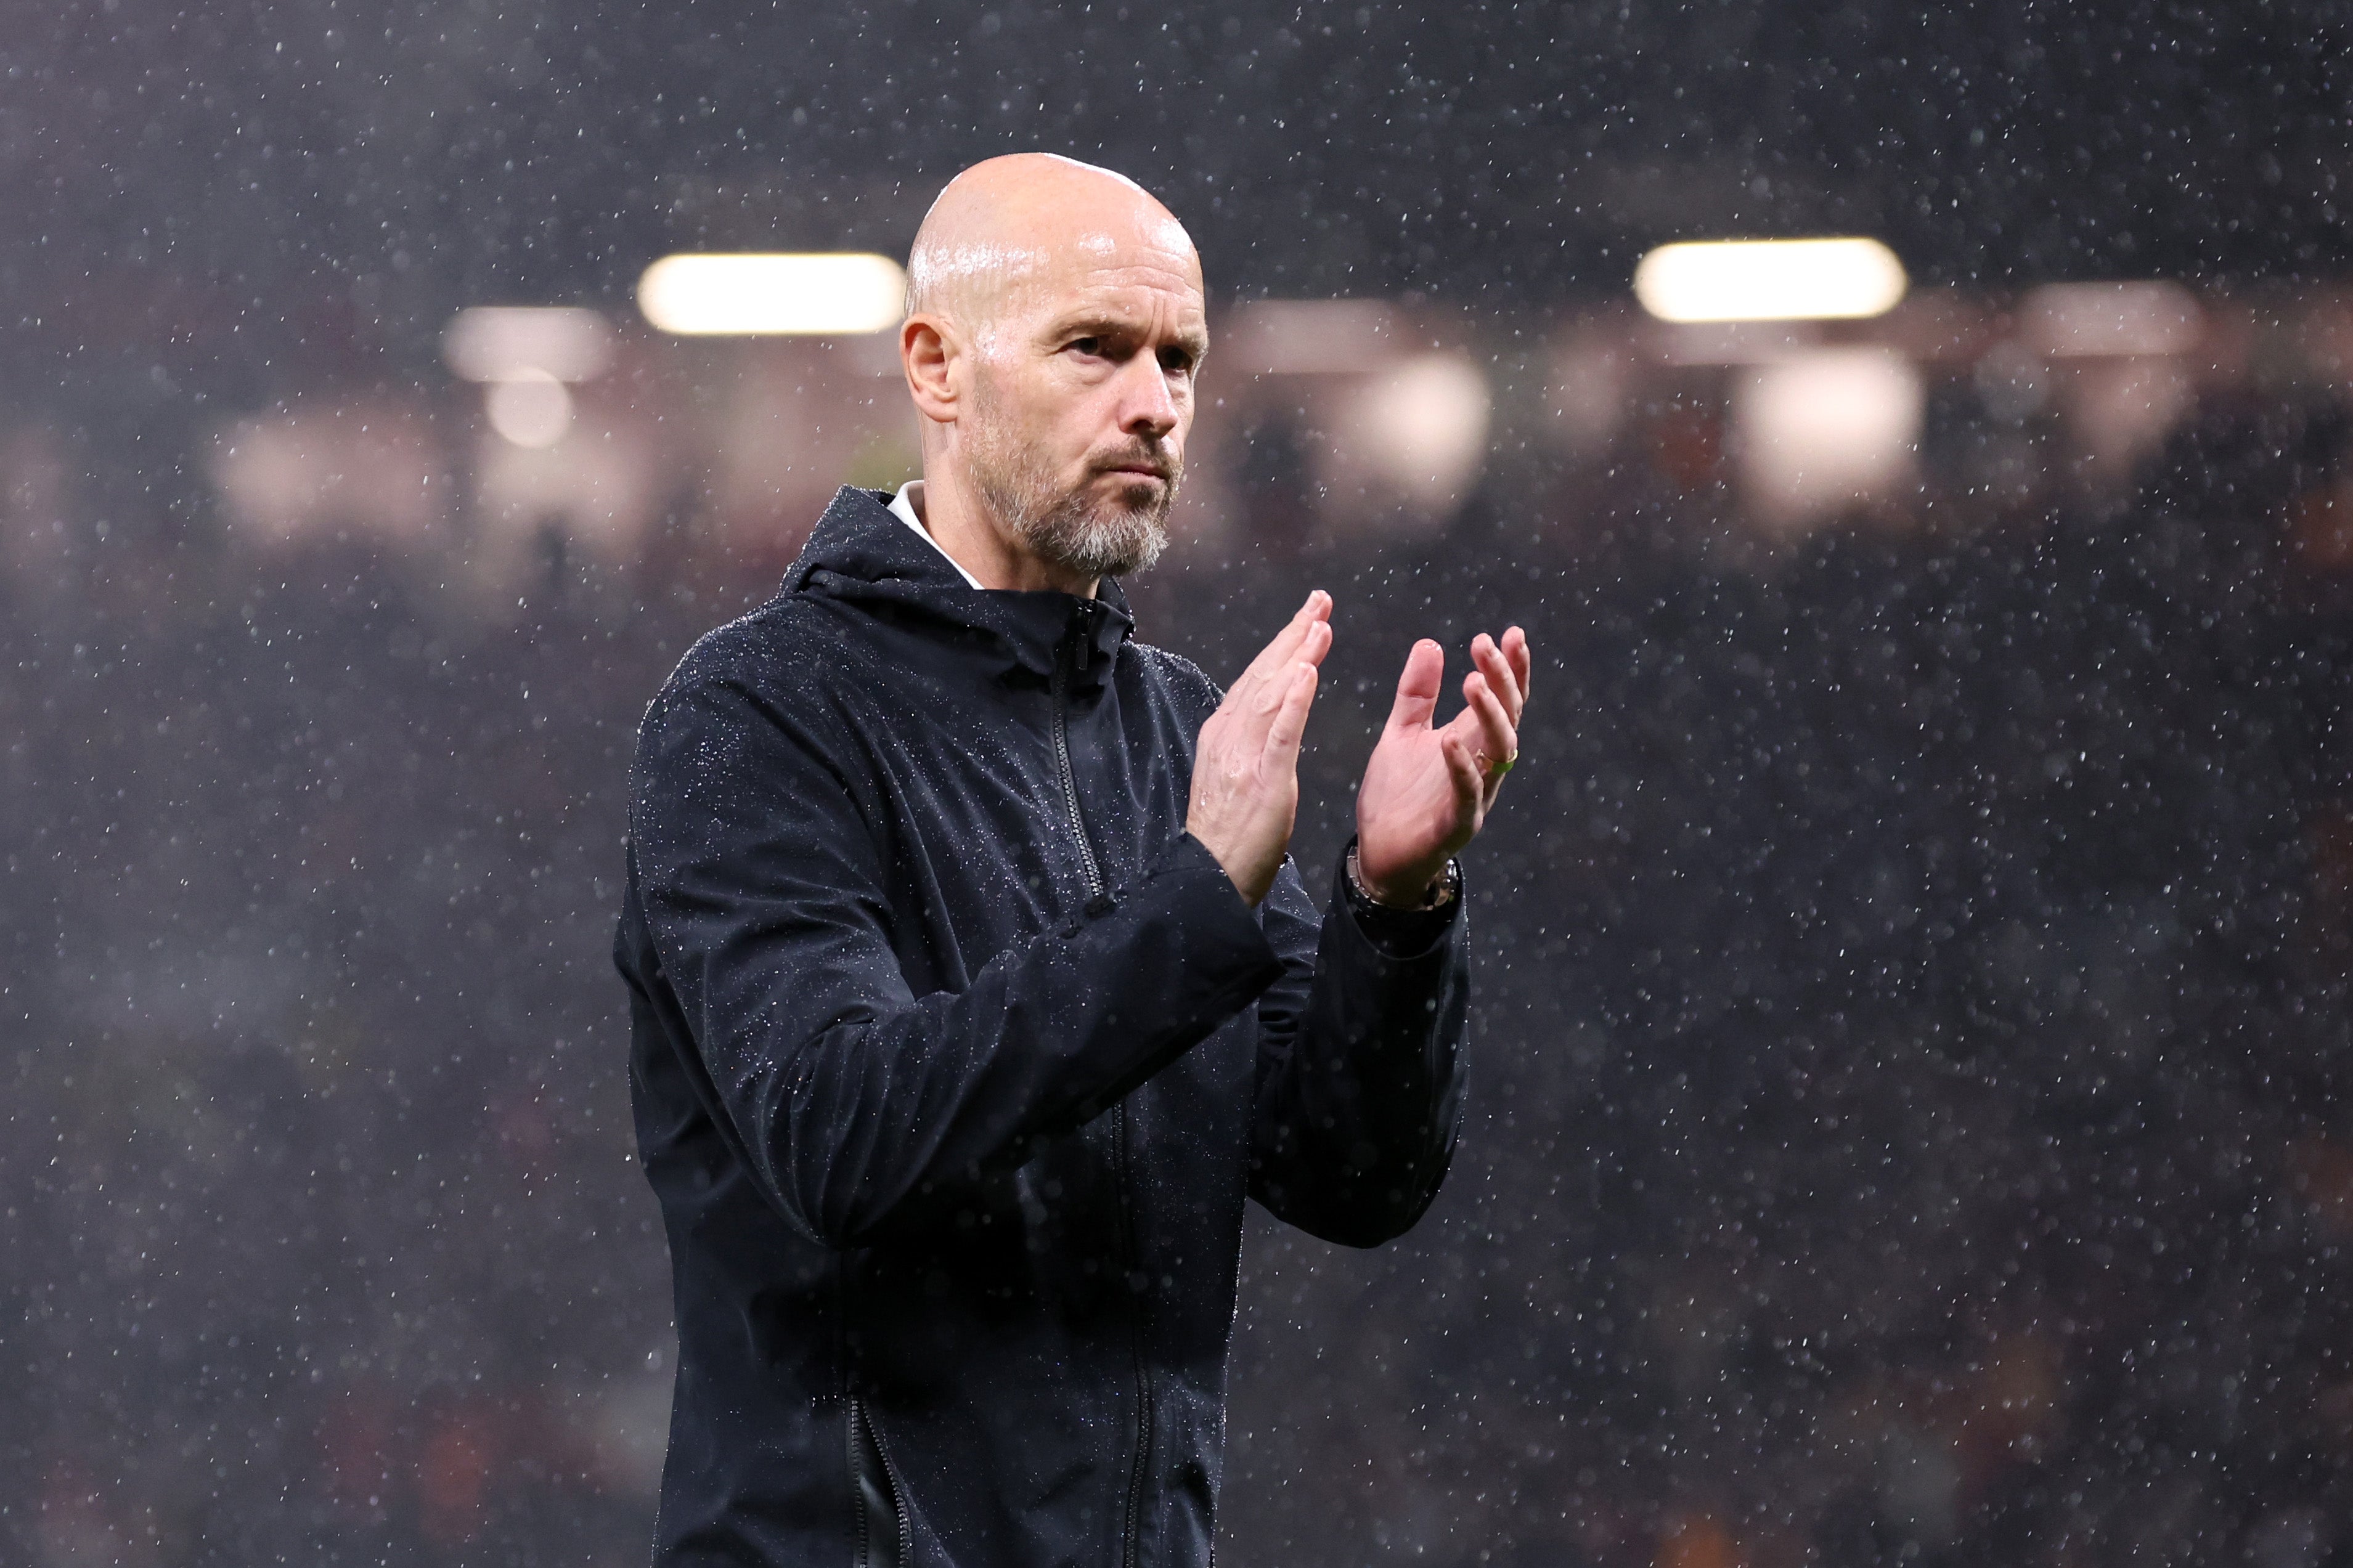 Ten Hag acknowledges the pressure to avoid three consecutive group defeats